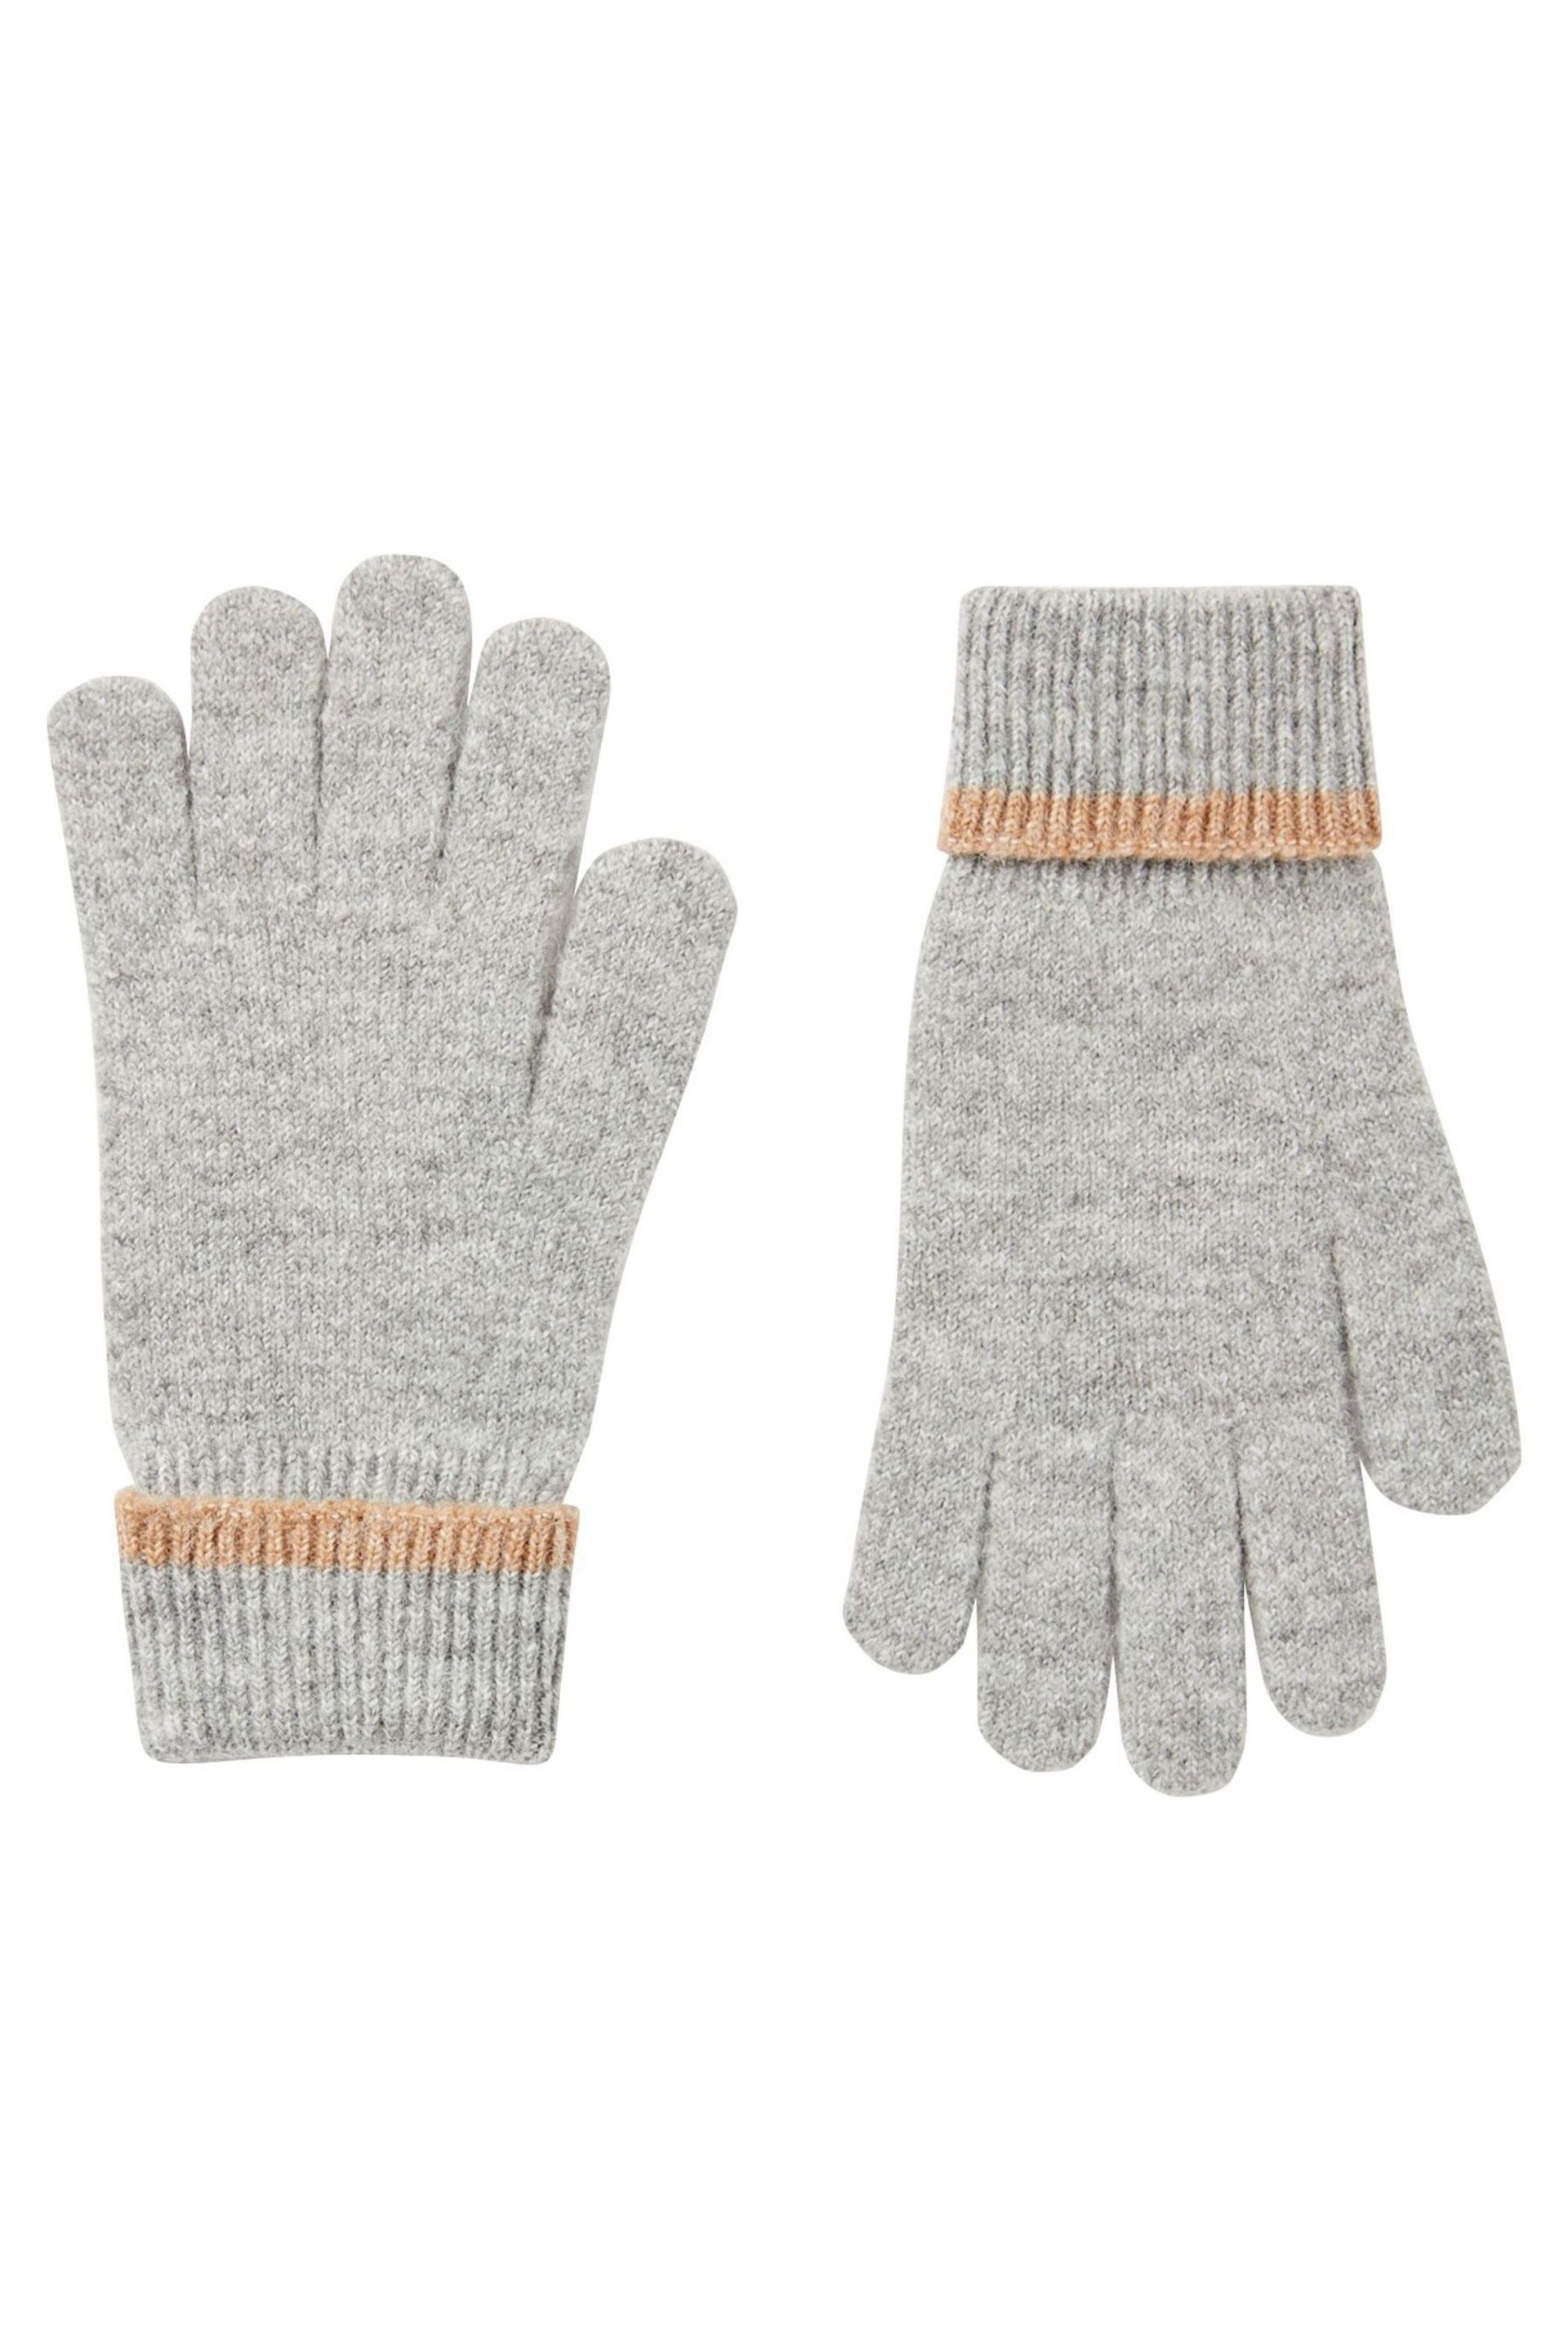 Joules Eloise Grey Knitted Gloves - Image 2 of 3